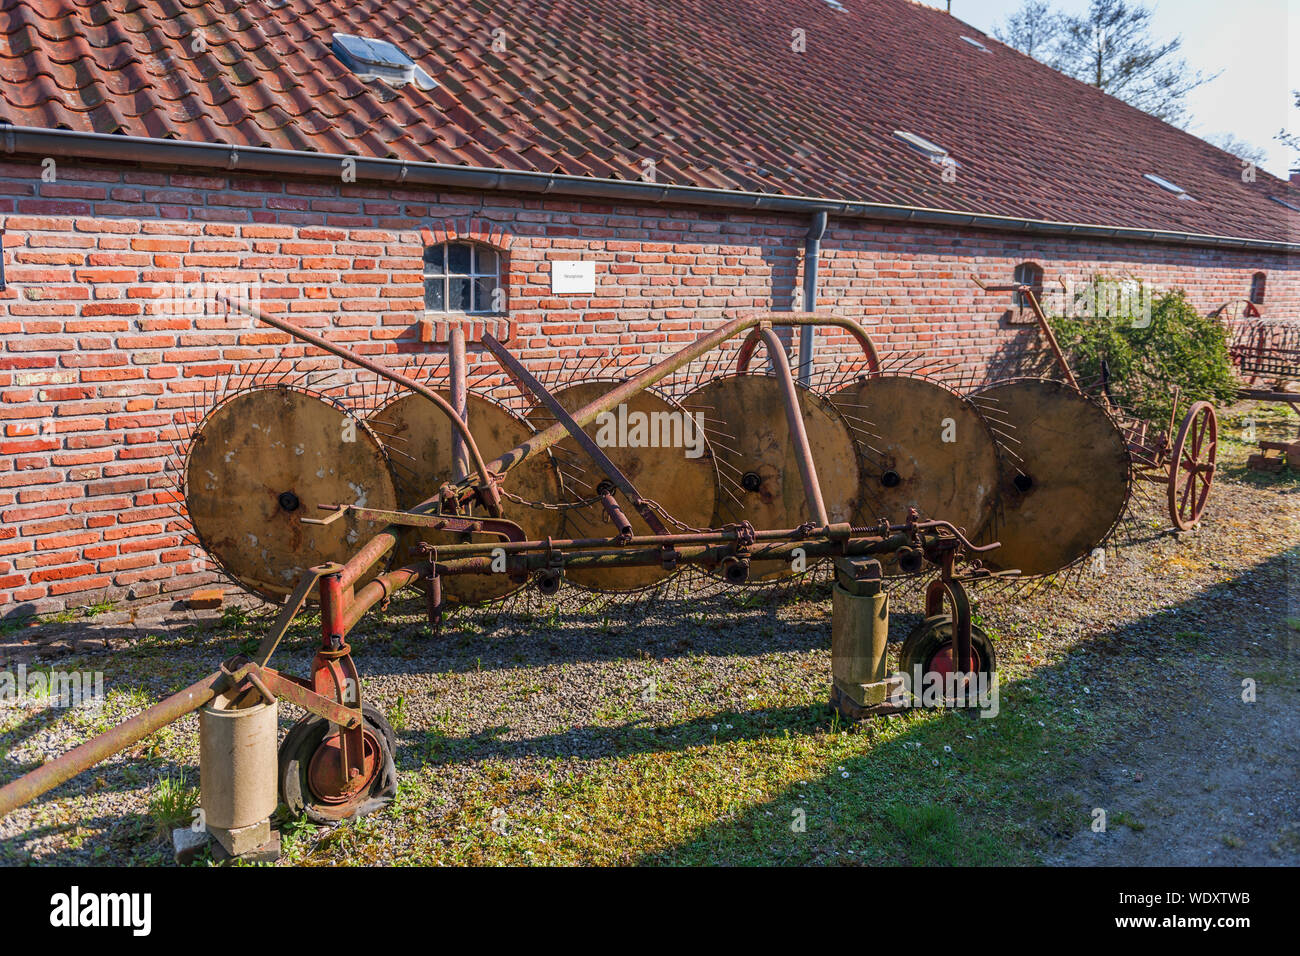 Wide angle view of an old, rusty tedder on a brick barn. Stock Photo